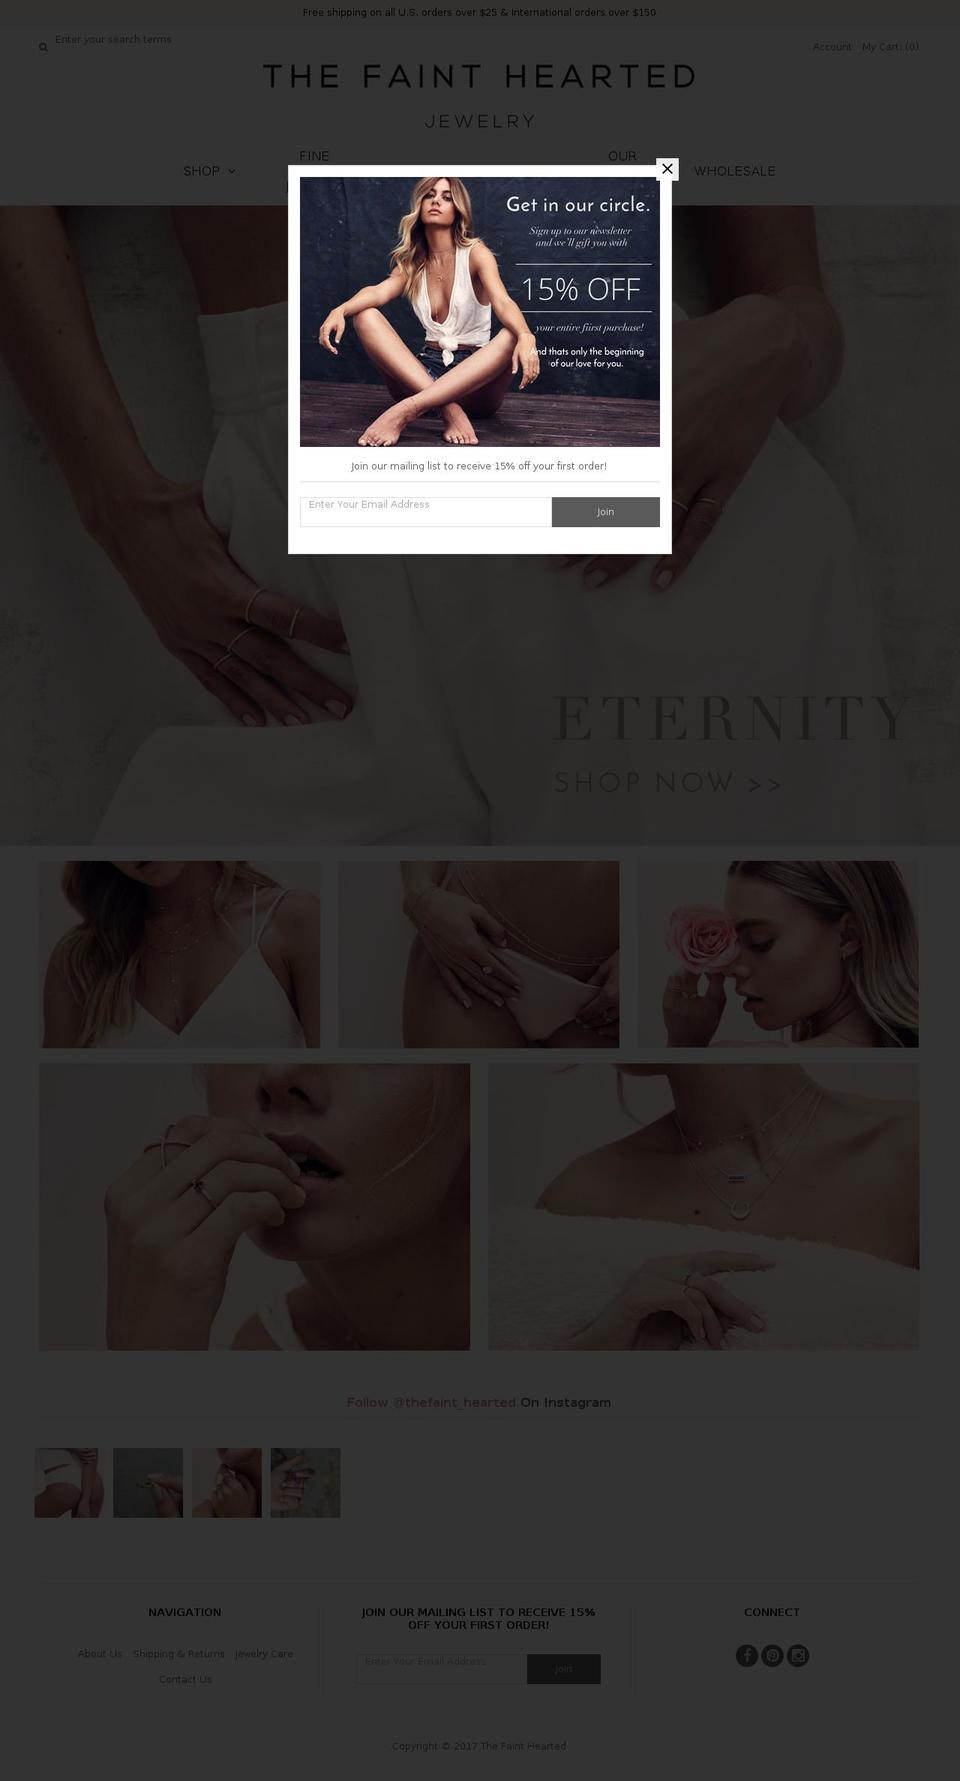 Vantage Shopify theme site example thefainthearted.com